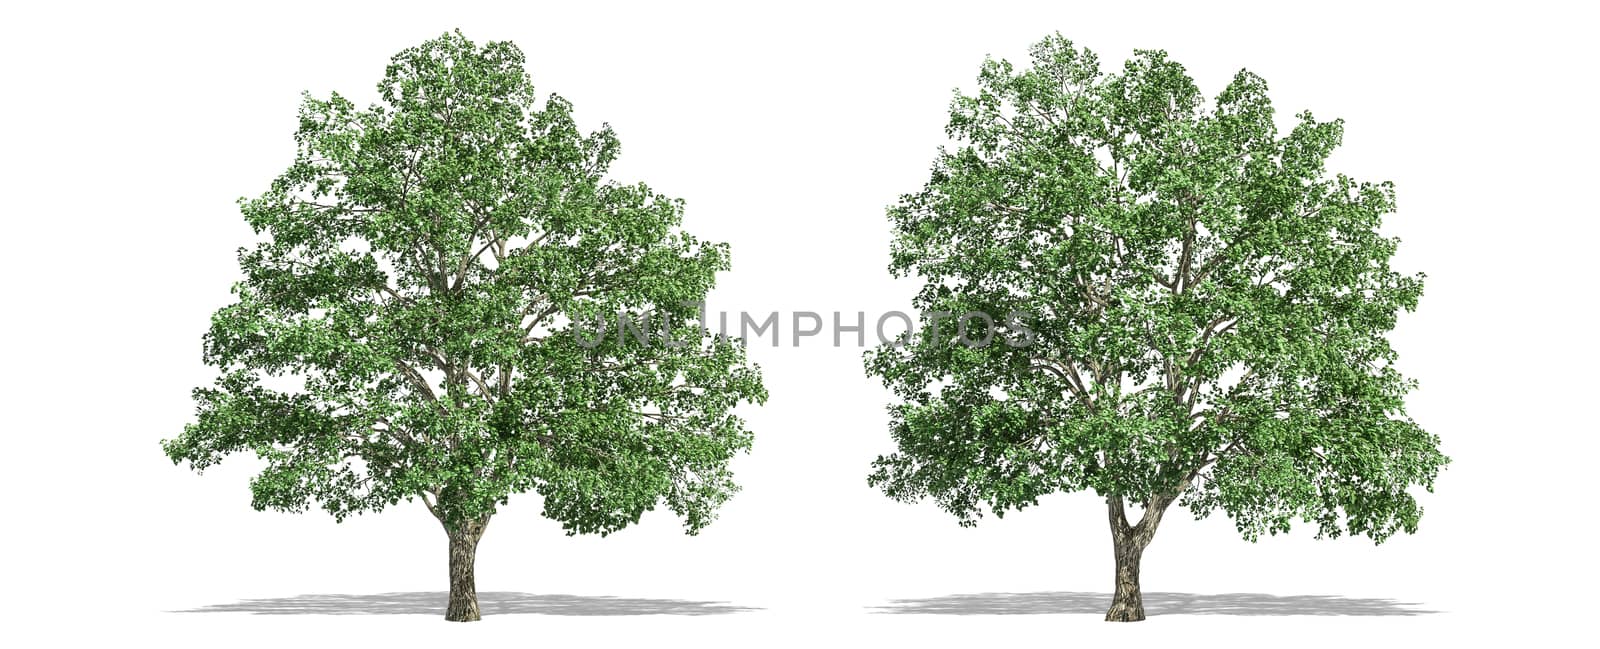 Beautiful Tilia tree isolated and cutting on a white background with clipping path.